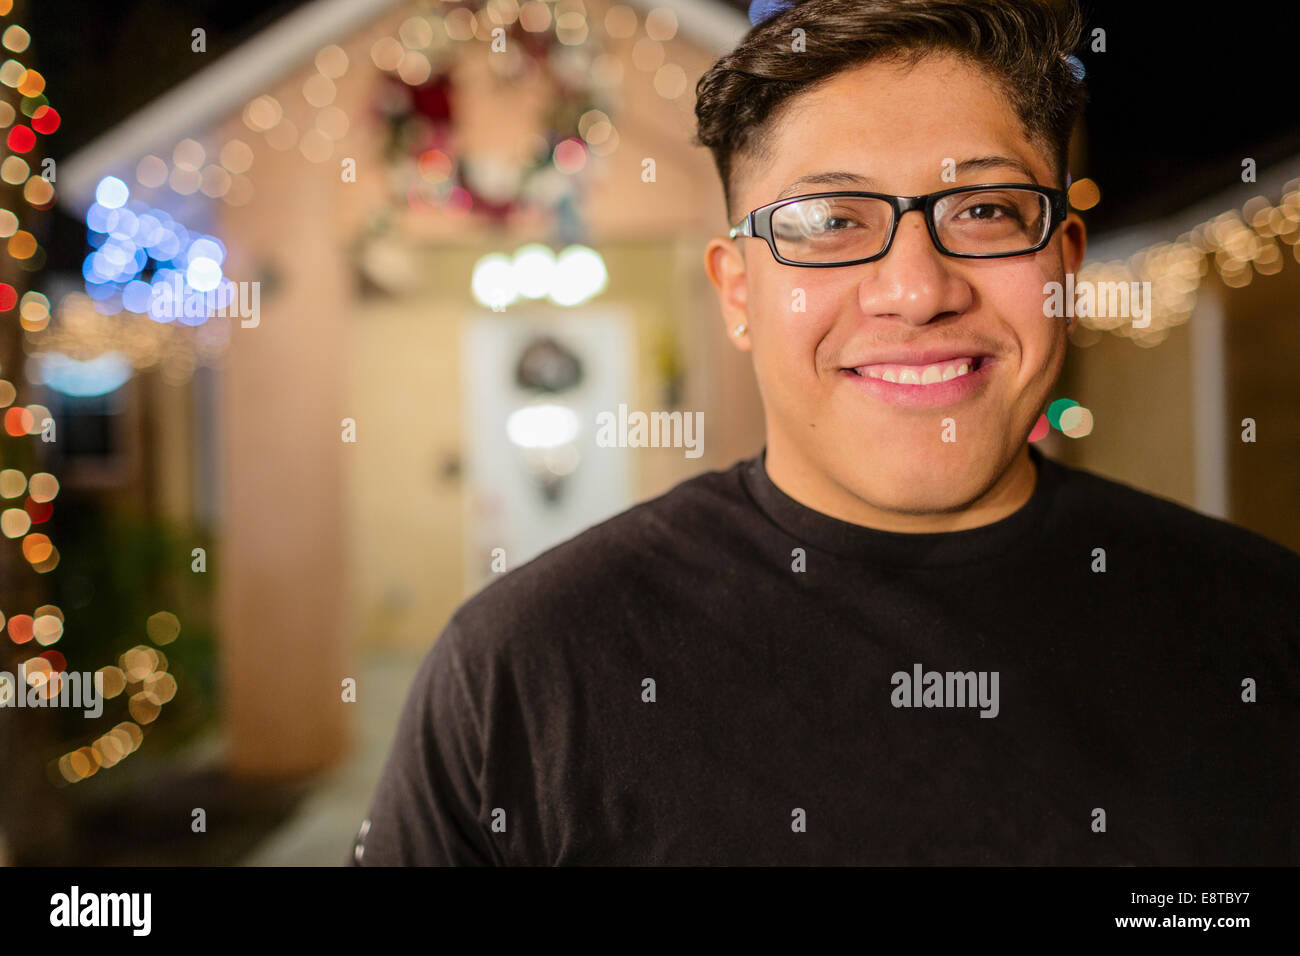 Hispanic man smiling outside house decorated with string lights Stock Photo